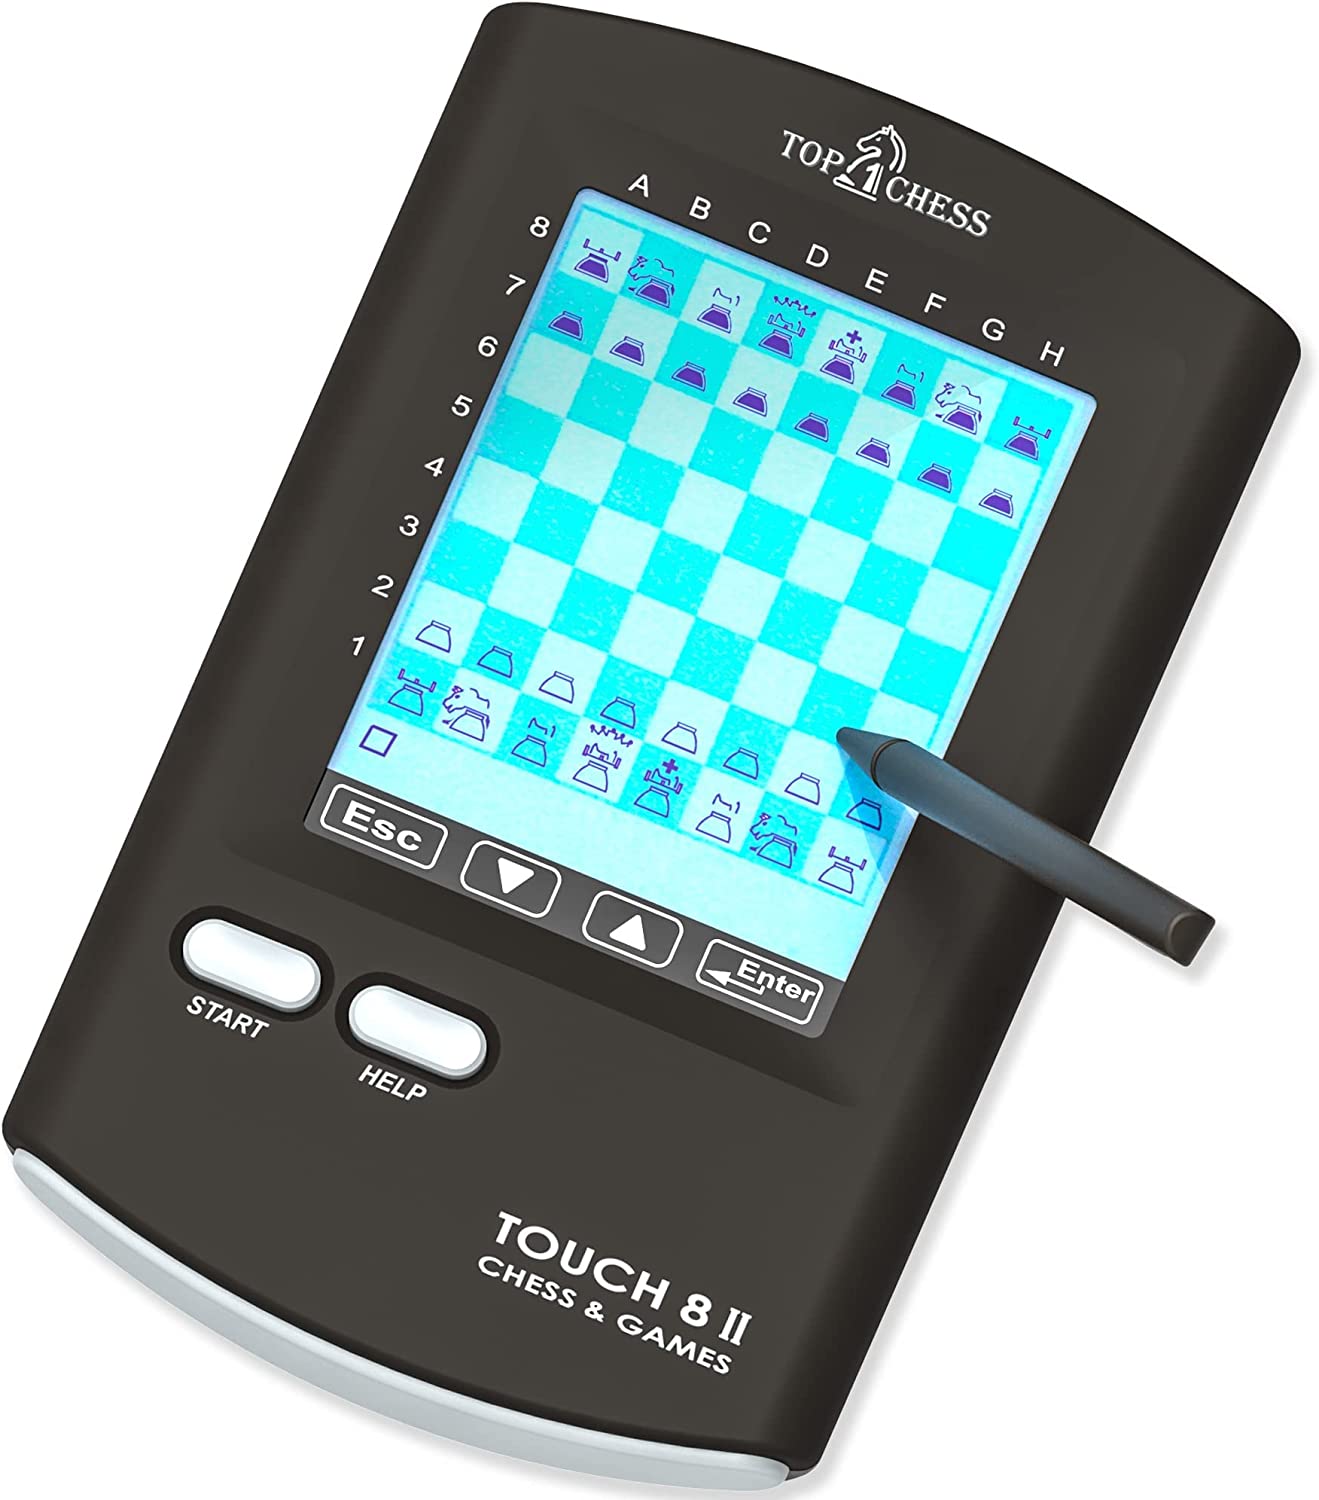 Top 1 Chess Mini Touch Electronic Chess Game, Strategy Games Computer Portable Travel Chess